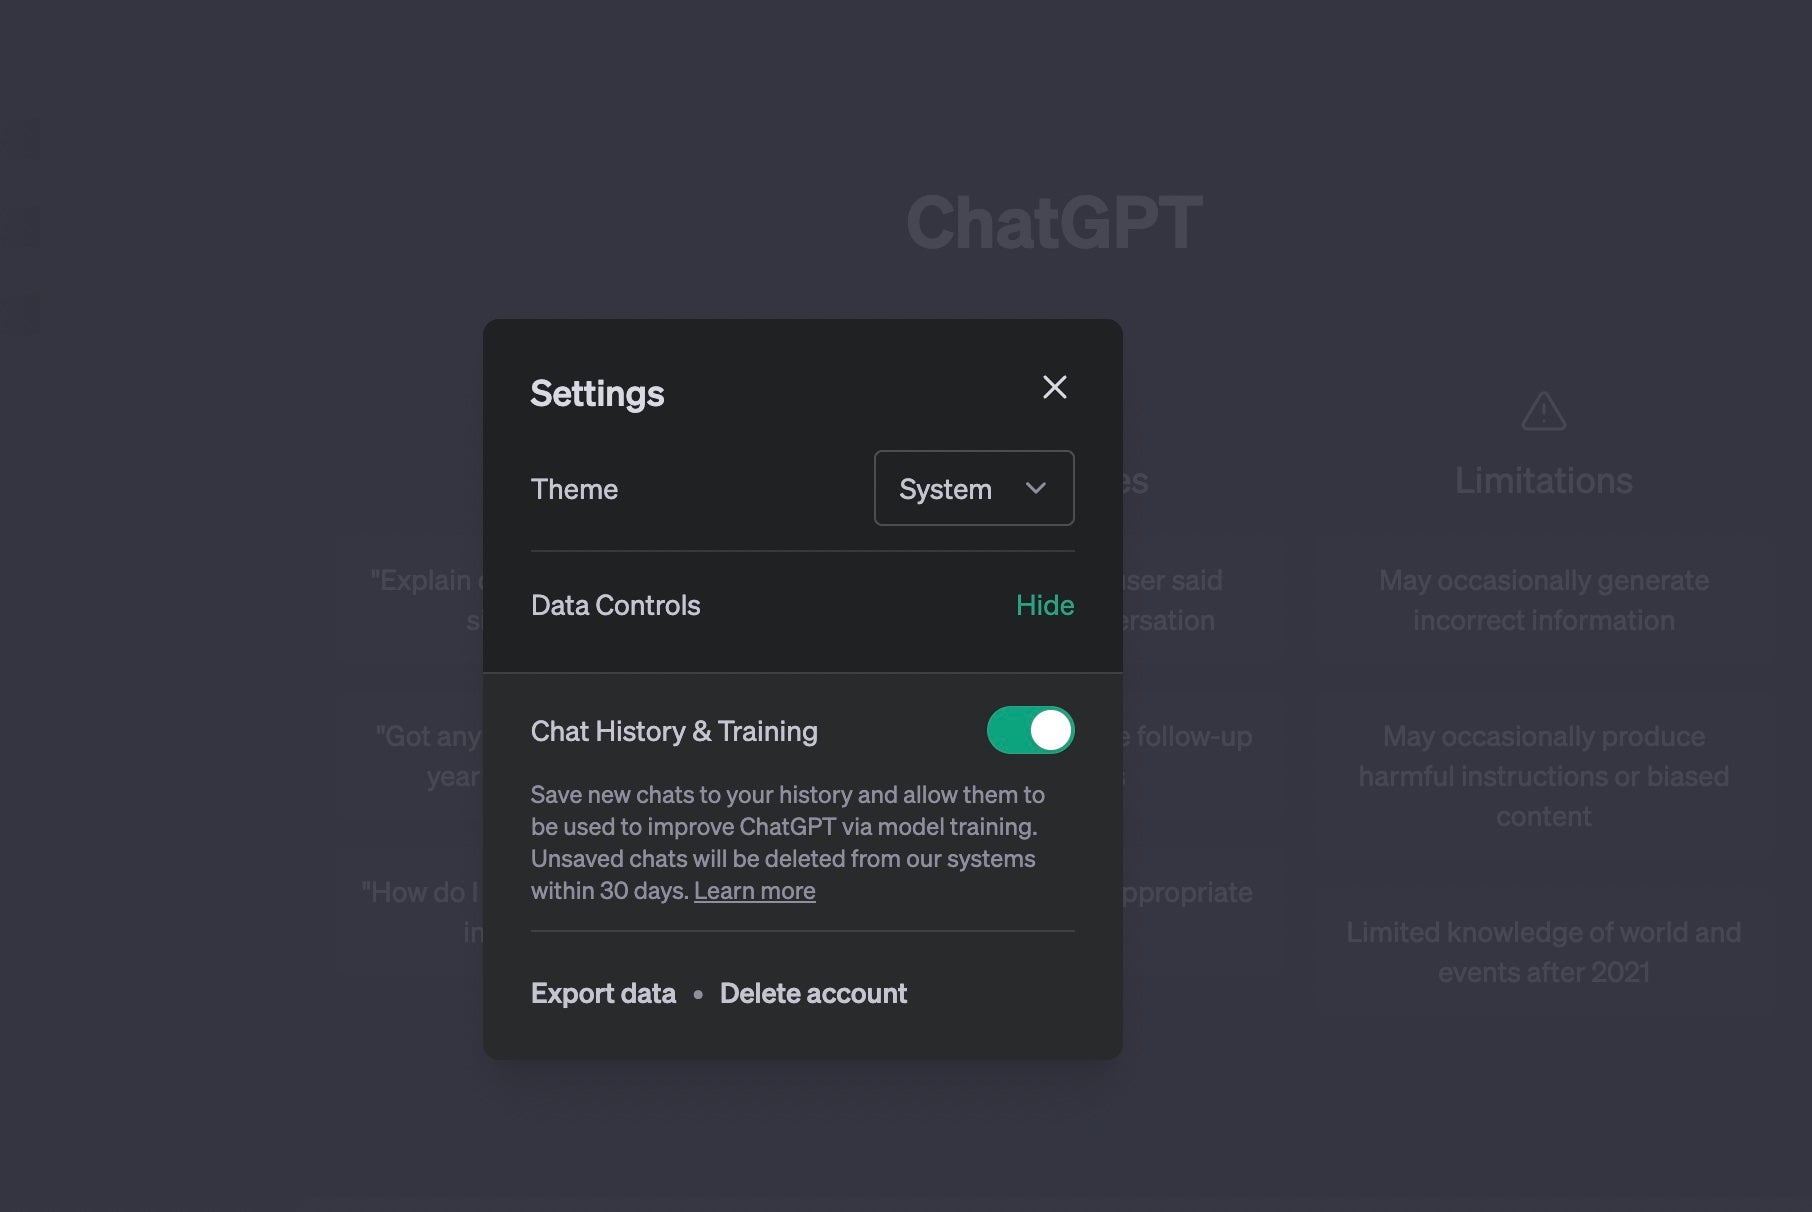 OpenAI added the Chat History &amp; Training setting to ChatGPT in April.